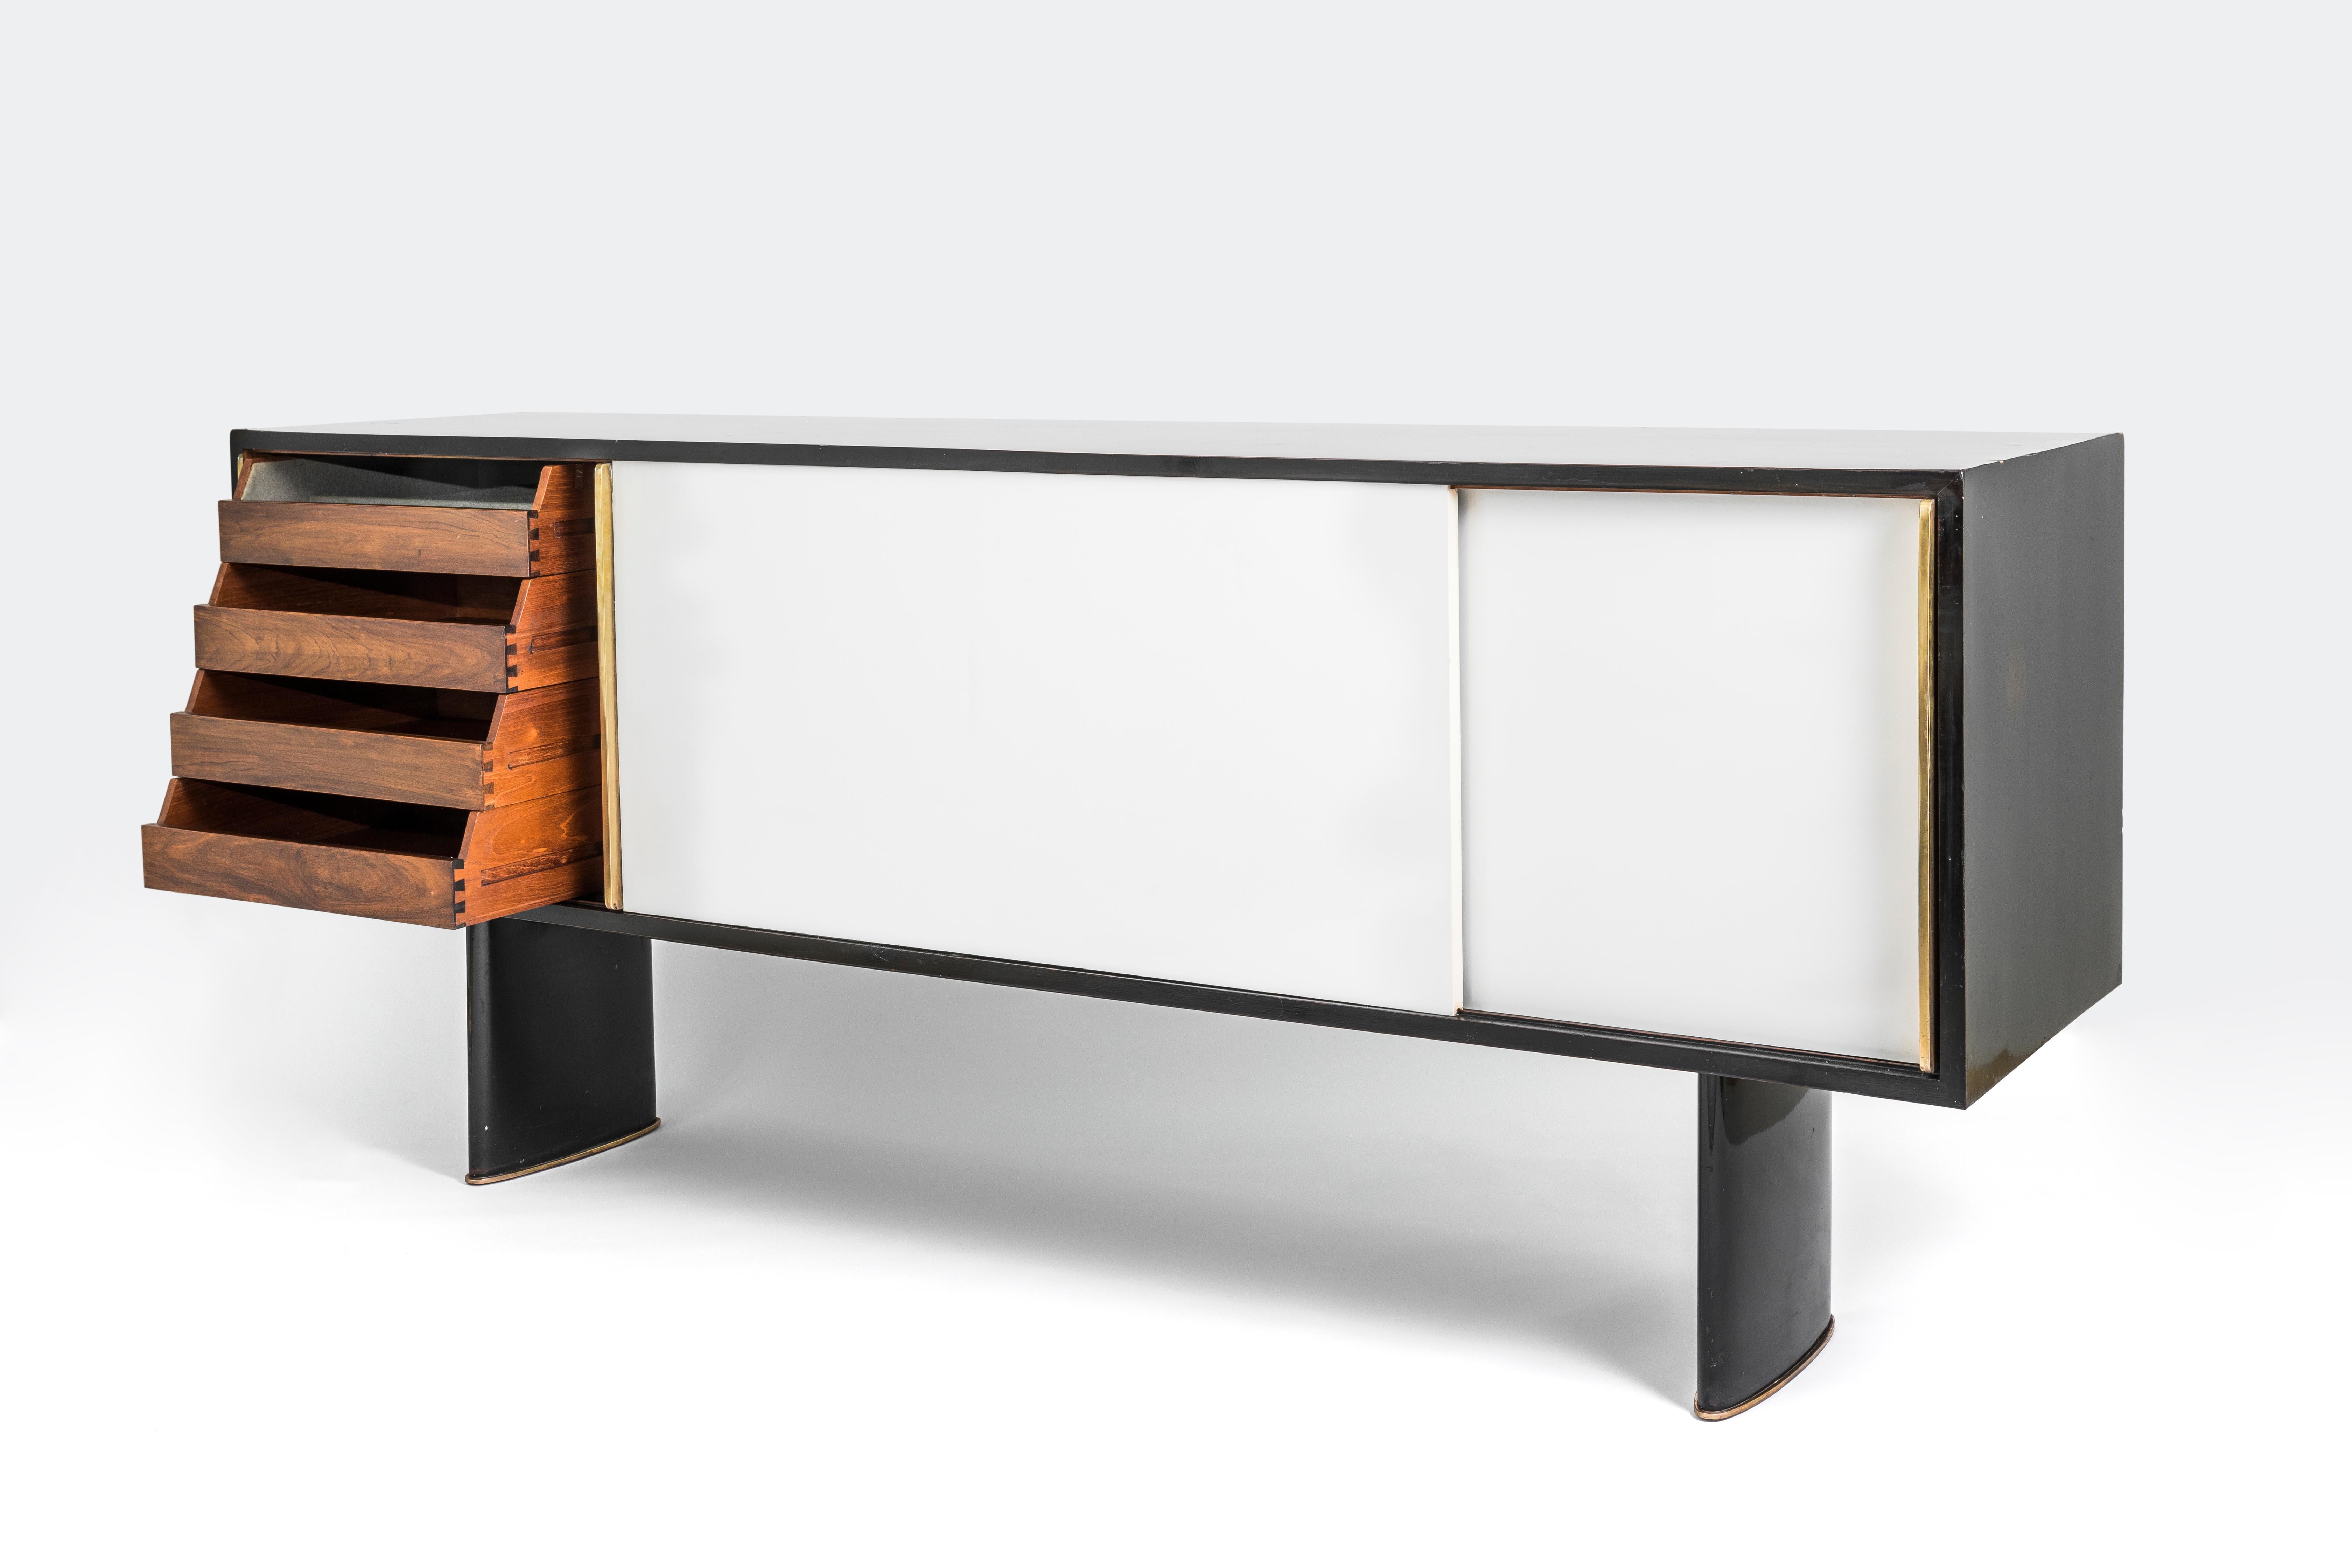 Sideboard by Joaquim Tenreiro, a early piece in his production; 1942, indicated by the label of the factory : Laubisch-Hirth. After 1943, Tenreiro will run his own production factory.
Inspired by the European Modern design and the Art Deco period,